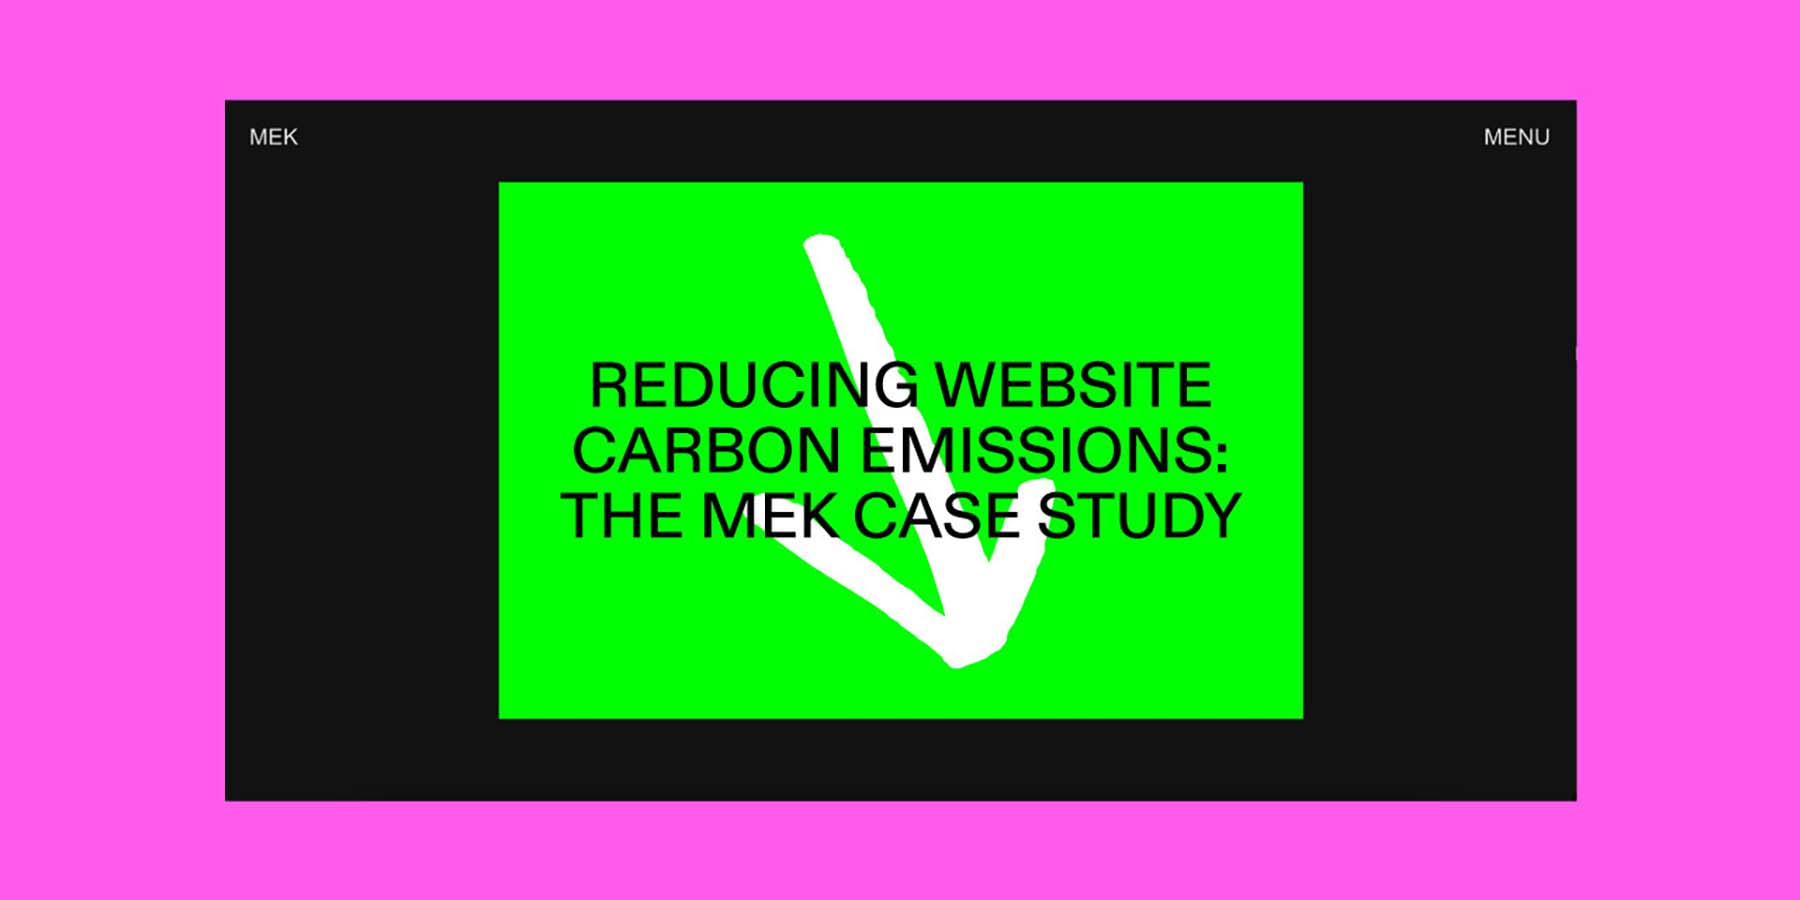 Image of a webpage with the text REDUCING WEBSITE CARBON EMISSIONS: THE MEK CASE STUDY